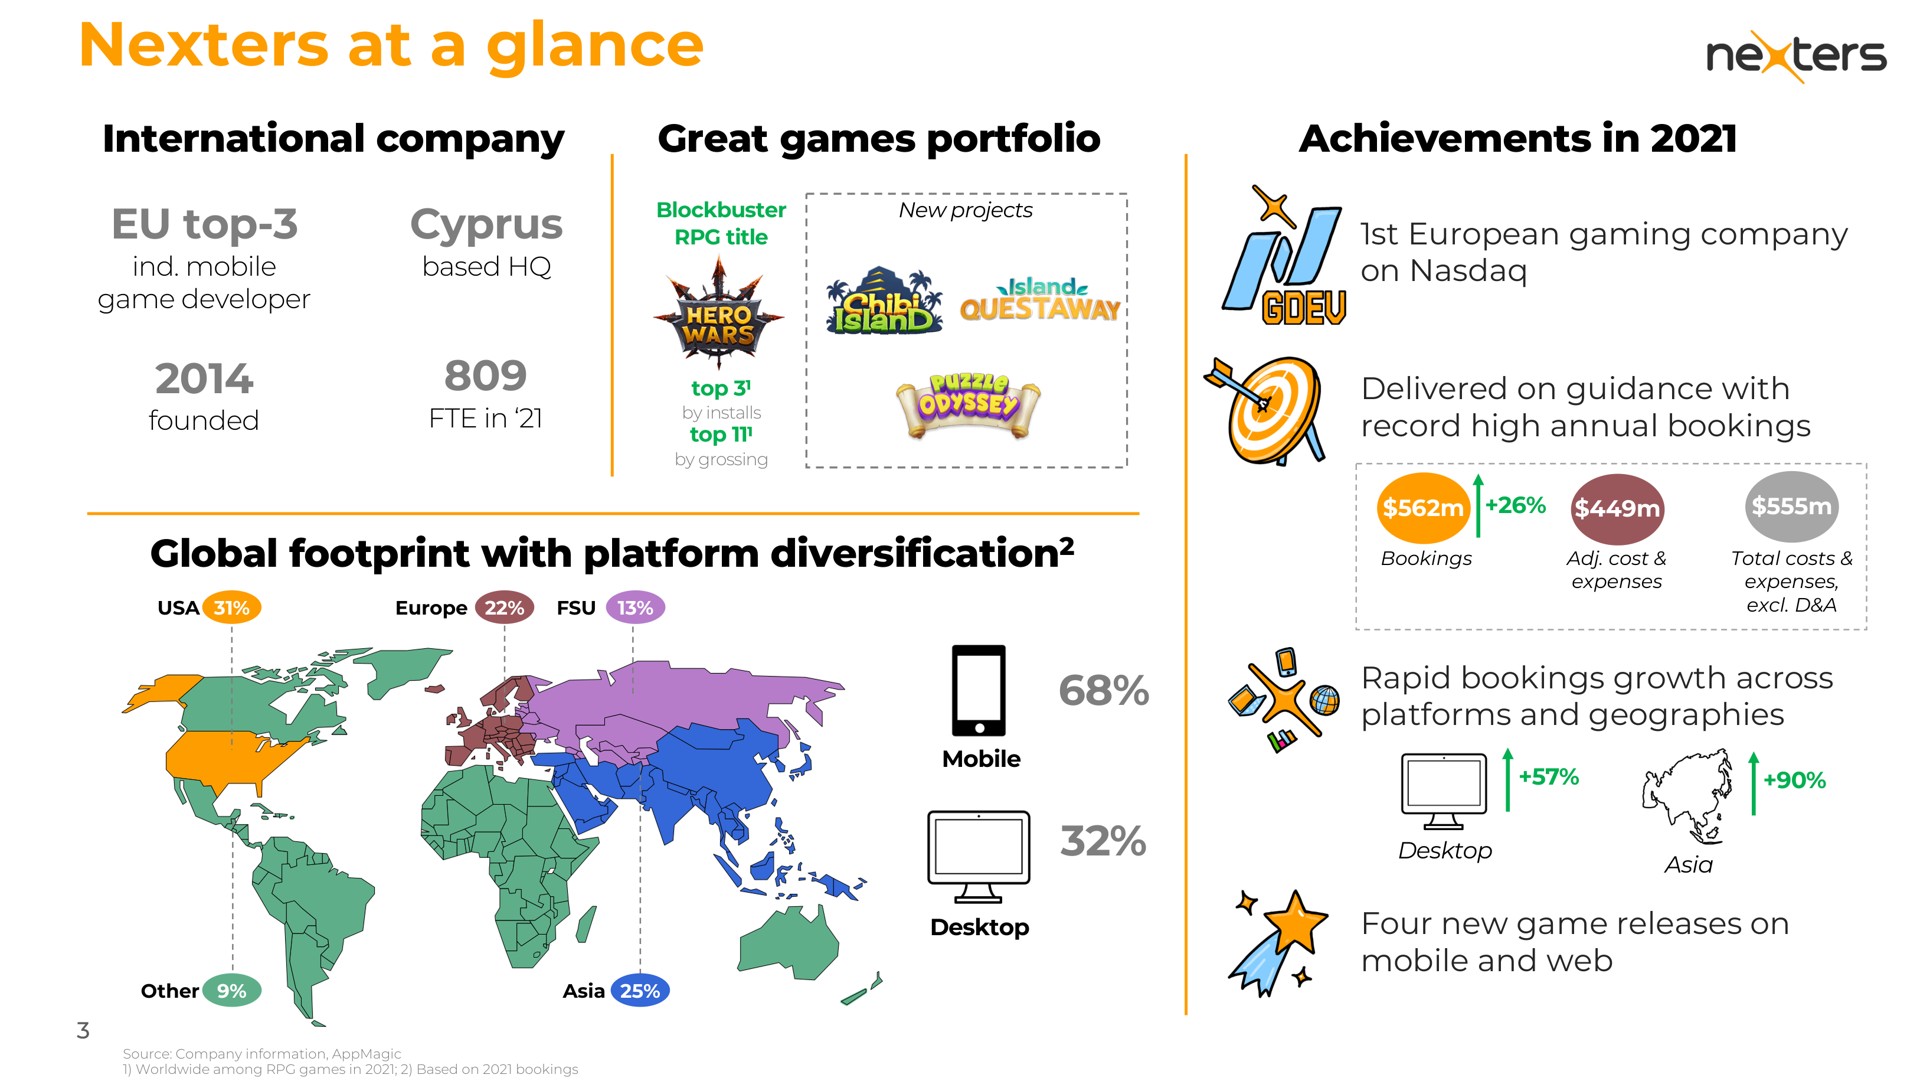 at a glance international company great games portfolio achievements in top global footprint with platform diversification diversification ing | Nexters